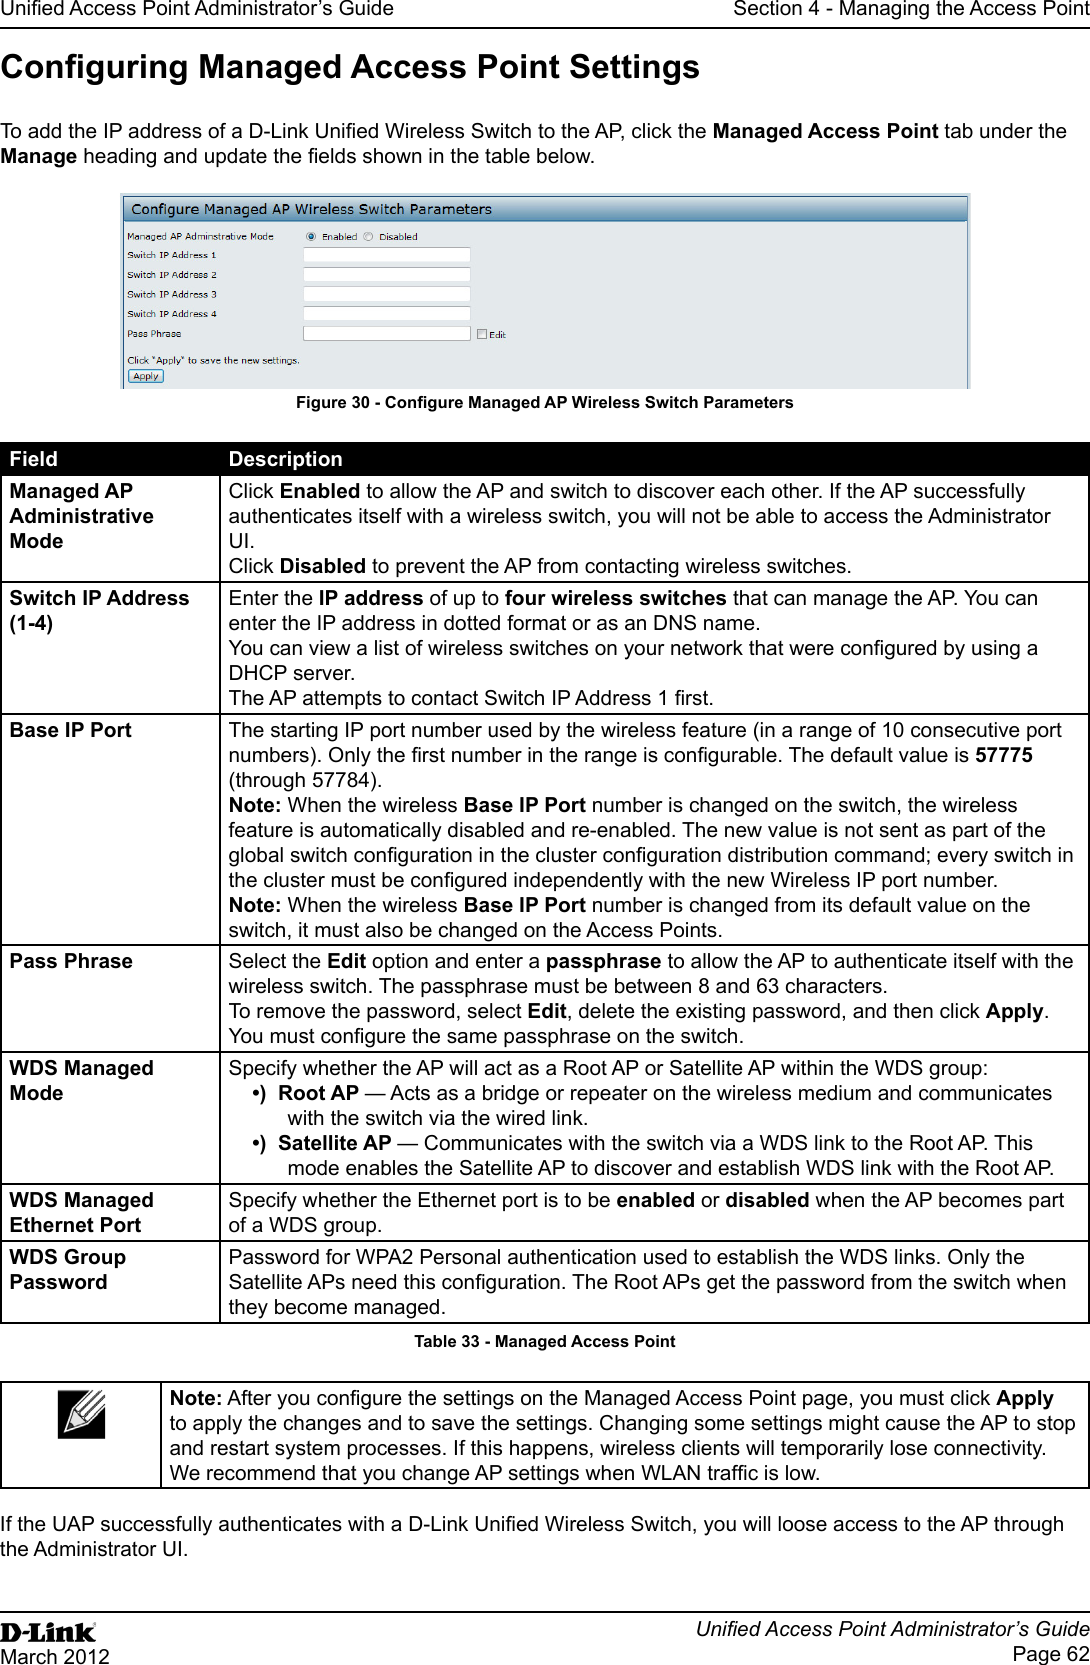 Unied Access Point Administrator’s GuideUnied Access Point Administrator’s GuidePage 62March 2012Section 4 - Managing the Access PointConguring Managed Access Point SettingsTo add the IP address of a D-Link Unied Wireless Switch to the AP, click the Managed Access Point tab under the Manage heading and update the elds shown in the table below.Figure 30 - Congure Managed AP Wireless Switch ParametersField DescriptionManaged AP Administrative ModeClick Enabled to allow the AP and switch to discover each other. If the AP successfully authenticates itself with a wireless switch, you will not be able to access the Administrator UI. Click Disabled to prevent the AP from contacting wireless switches.Switch IP Address (1-4)Enter the IP address of up to four wireless switches that can manage the AP. You can enter the IP address in dotted format or as an DNS name.You can view a list of wireless switches on your network that were congured by using a DHCP server.The AP attempts to contact Switch IP Address 1 rst.Base IP Port The starting IP port number used by the wireless feature (in a range of 10 consecutive port numbers). Only the rst number in the range is congurable. The default value is 57775 (through 57784).Note: When the wireless Base IP Port number is changed on the switch, the wireless feature is automatically disabled and re-enabled. The new value is not sent as part of the global switch conguration in the cluster conguration distribution command; every switch in the cluster must be congured independently with the new Wireless IP port number.Note: When the wireless Base IP Port number is changed from its default value on the switch, it must also be changed on the Access Points.Pass Phrase Select the Edit option and enter a passphrase to allow the AP to authenticate itself with the wireless switch. The passphrase must be between 8 and 63 characters. To remove the password, select Edit, delete the existing password, and then click Apply.You must congure the same passphrase on the switch.WDS Managed ModeSpecify whether the AP will act as a Root AP or Satellite AP within the WDS group:•)  Root AP — Acts as a bridge or repeater on the wireless medium and communicates with the switch via the wired link.•)  Satellite AP — Communicates with the switch via a WDS link to the Root AP. This mode enables the Satellite AP to discover and establish WDS link with the Root AP.WDS Managed Ethernet PortSpecify whether the Ethernet port is to be enabled or disabled when the AP becomes part of a WDS group.WDS Group PasswordPassword for WPA2 Personal authentication used to establish the WDS links. Only the Satellite APs need this conguration. The Root APs get the password from the switch when they become managed.Table 33 - Managed Access PointNote: After you congure the settings on the Managed Access Point page, you must click Apply to apply the changes and to save the settings. Changing some settings might cause the AP to stop and restart system processes. If this happens, wireless clients will temporarily lose connectivity. We recommend that you change AP settings when WLAN trafc is low. If the UAP successfully authenticates with a D-Link Unied Wireless Switch, you will loose access to the AP through the Administrator UI.